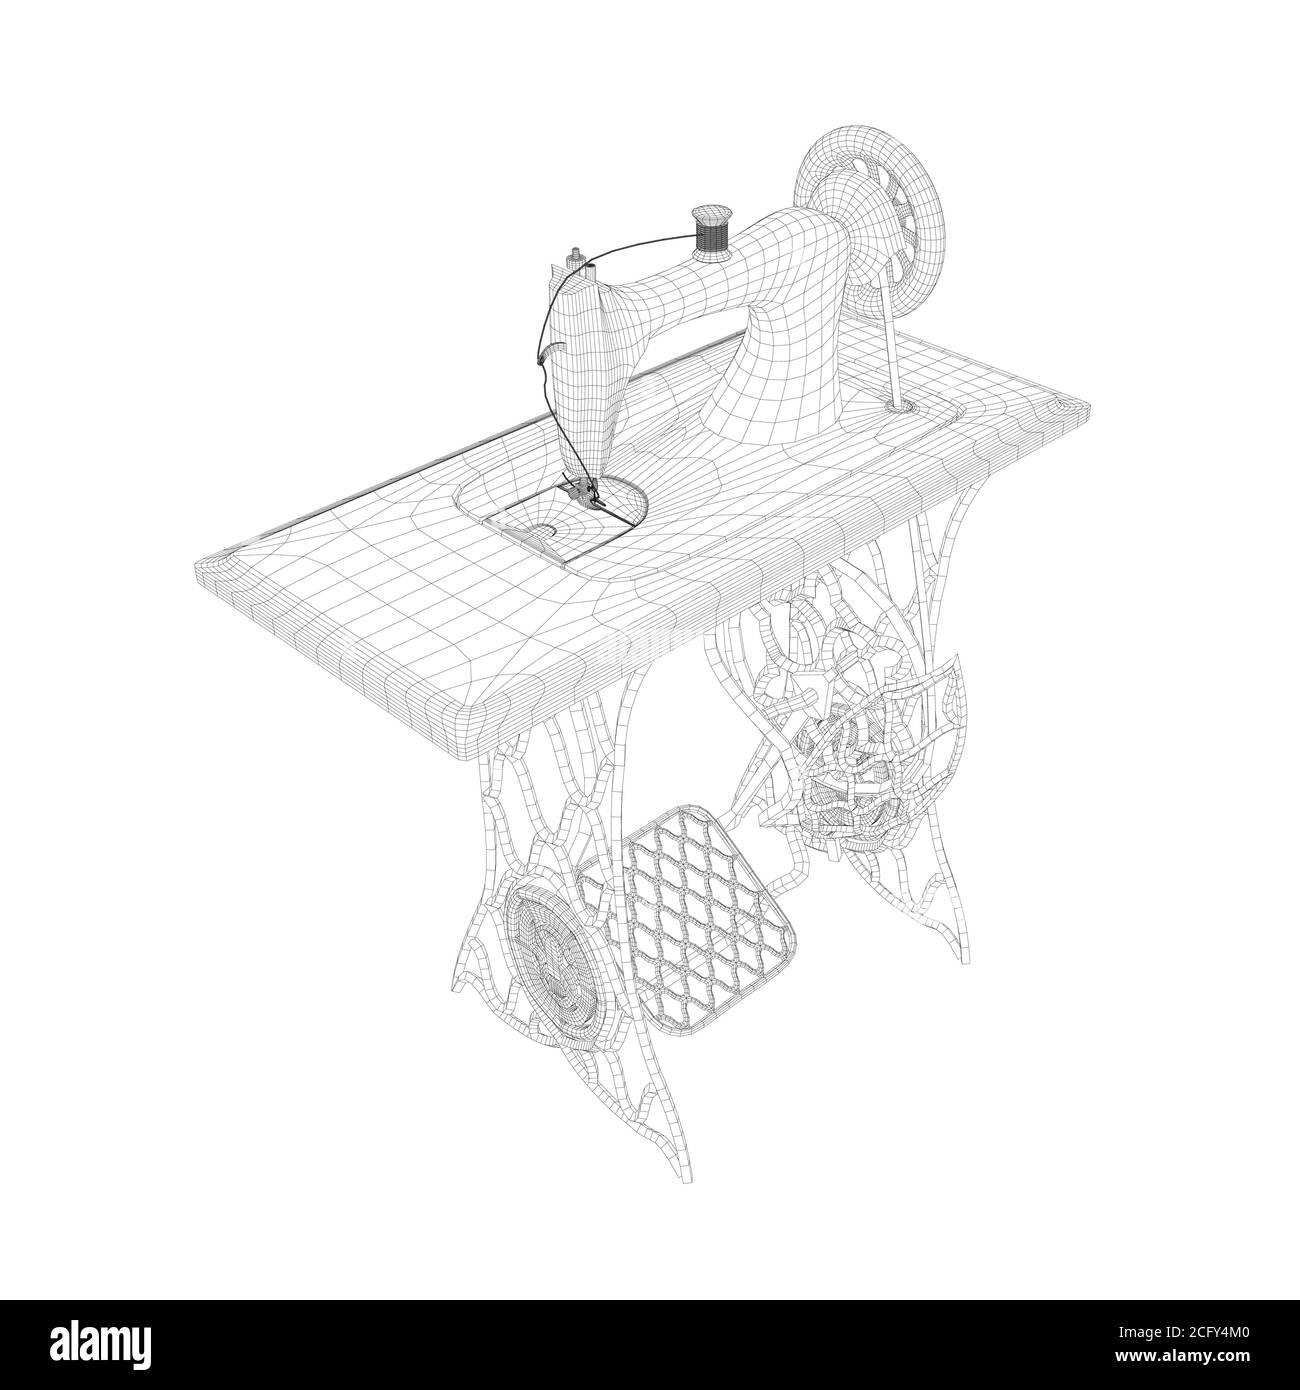 Wireframe of a decorative vintage sewing machine made of black lines on a white background. Manual sewing machine with rotation mechanism. Isometric Stock Vector